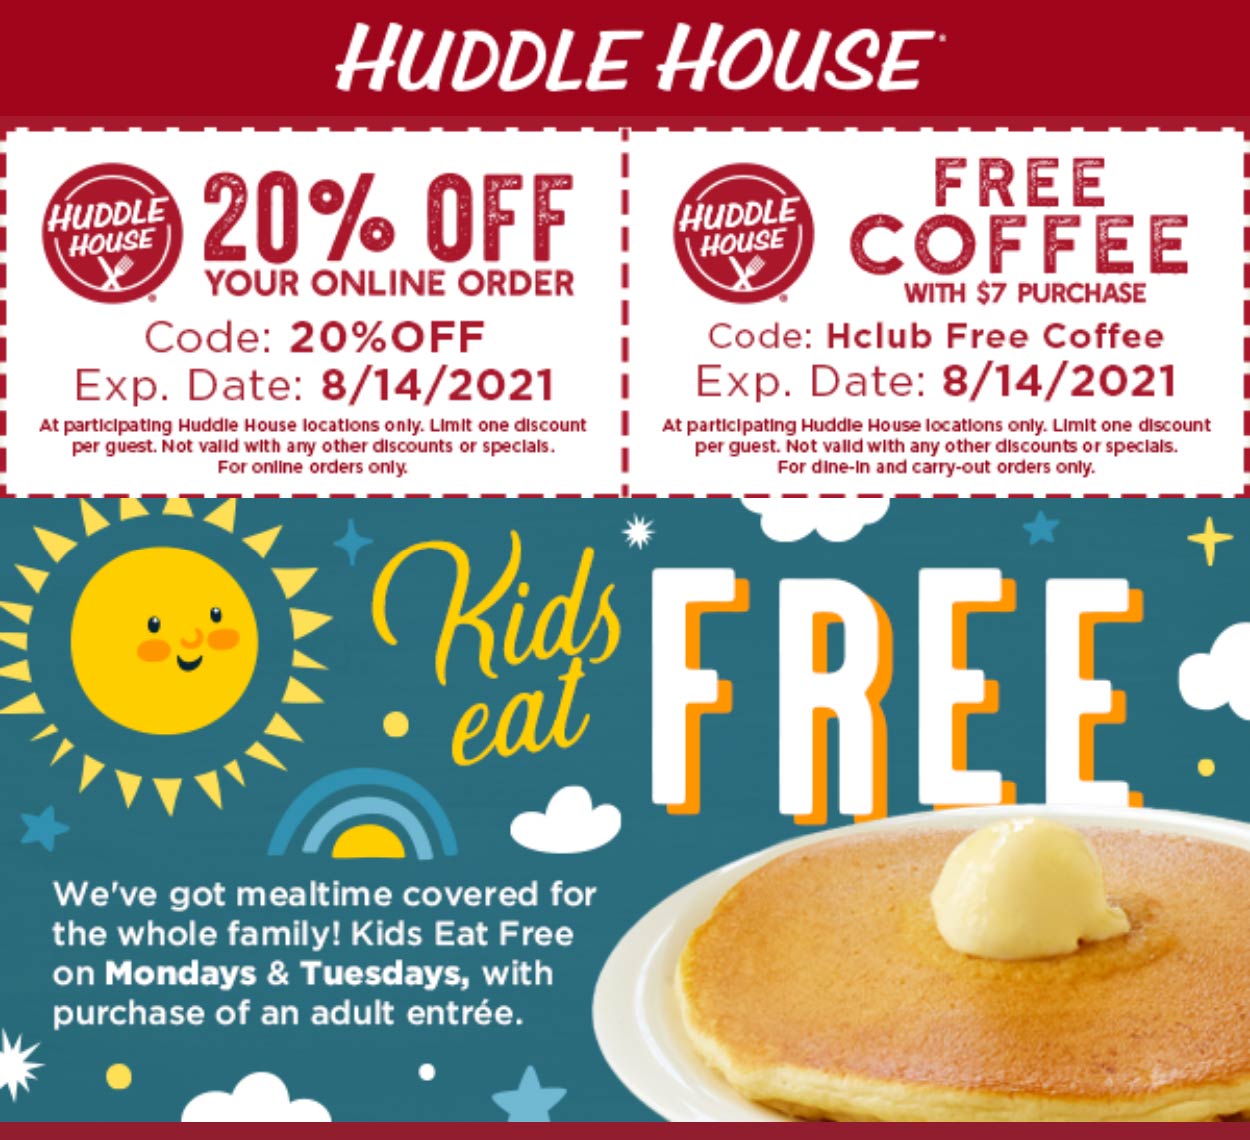 Huddle House restaurants Coupon  Free coffee & 20% off at Huddle House restaurants #huddlehouse 